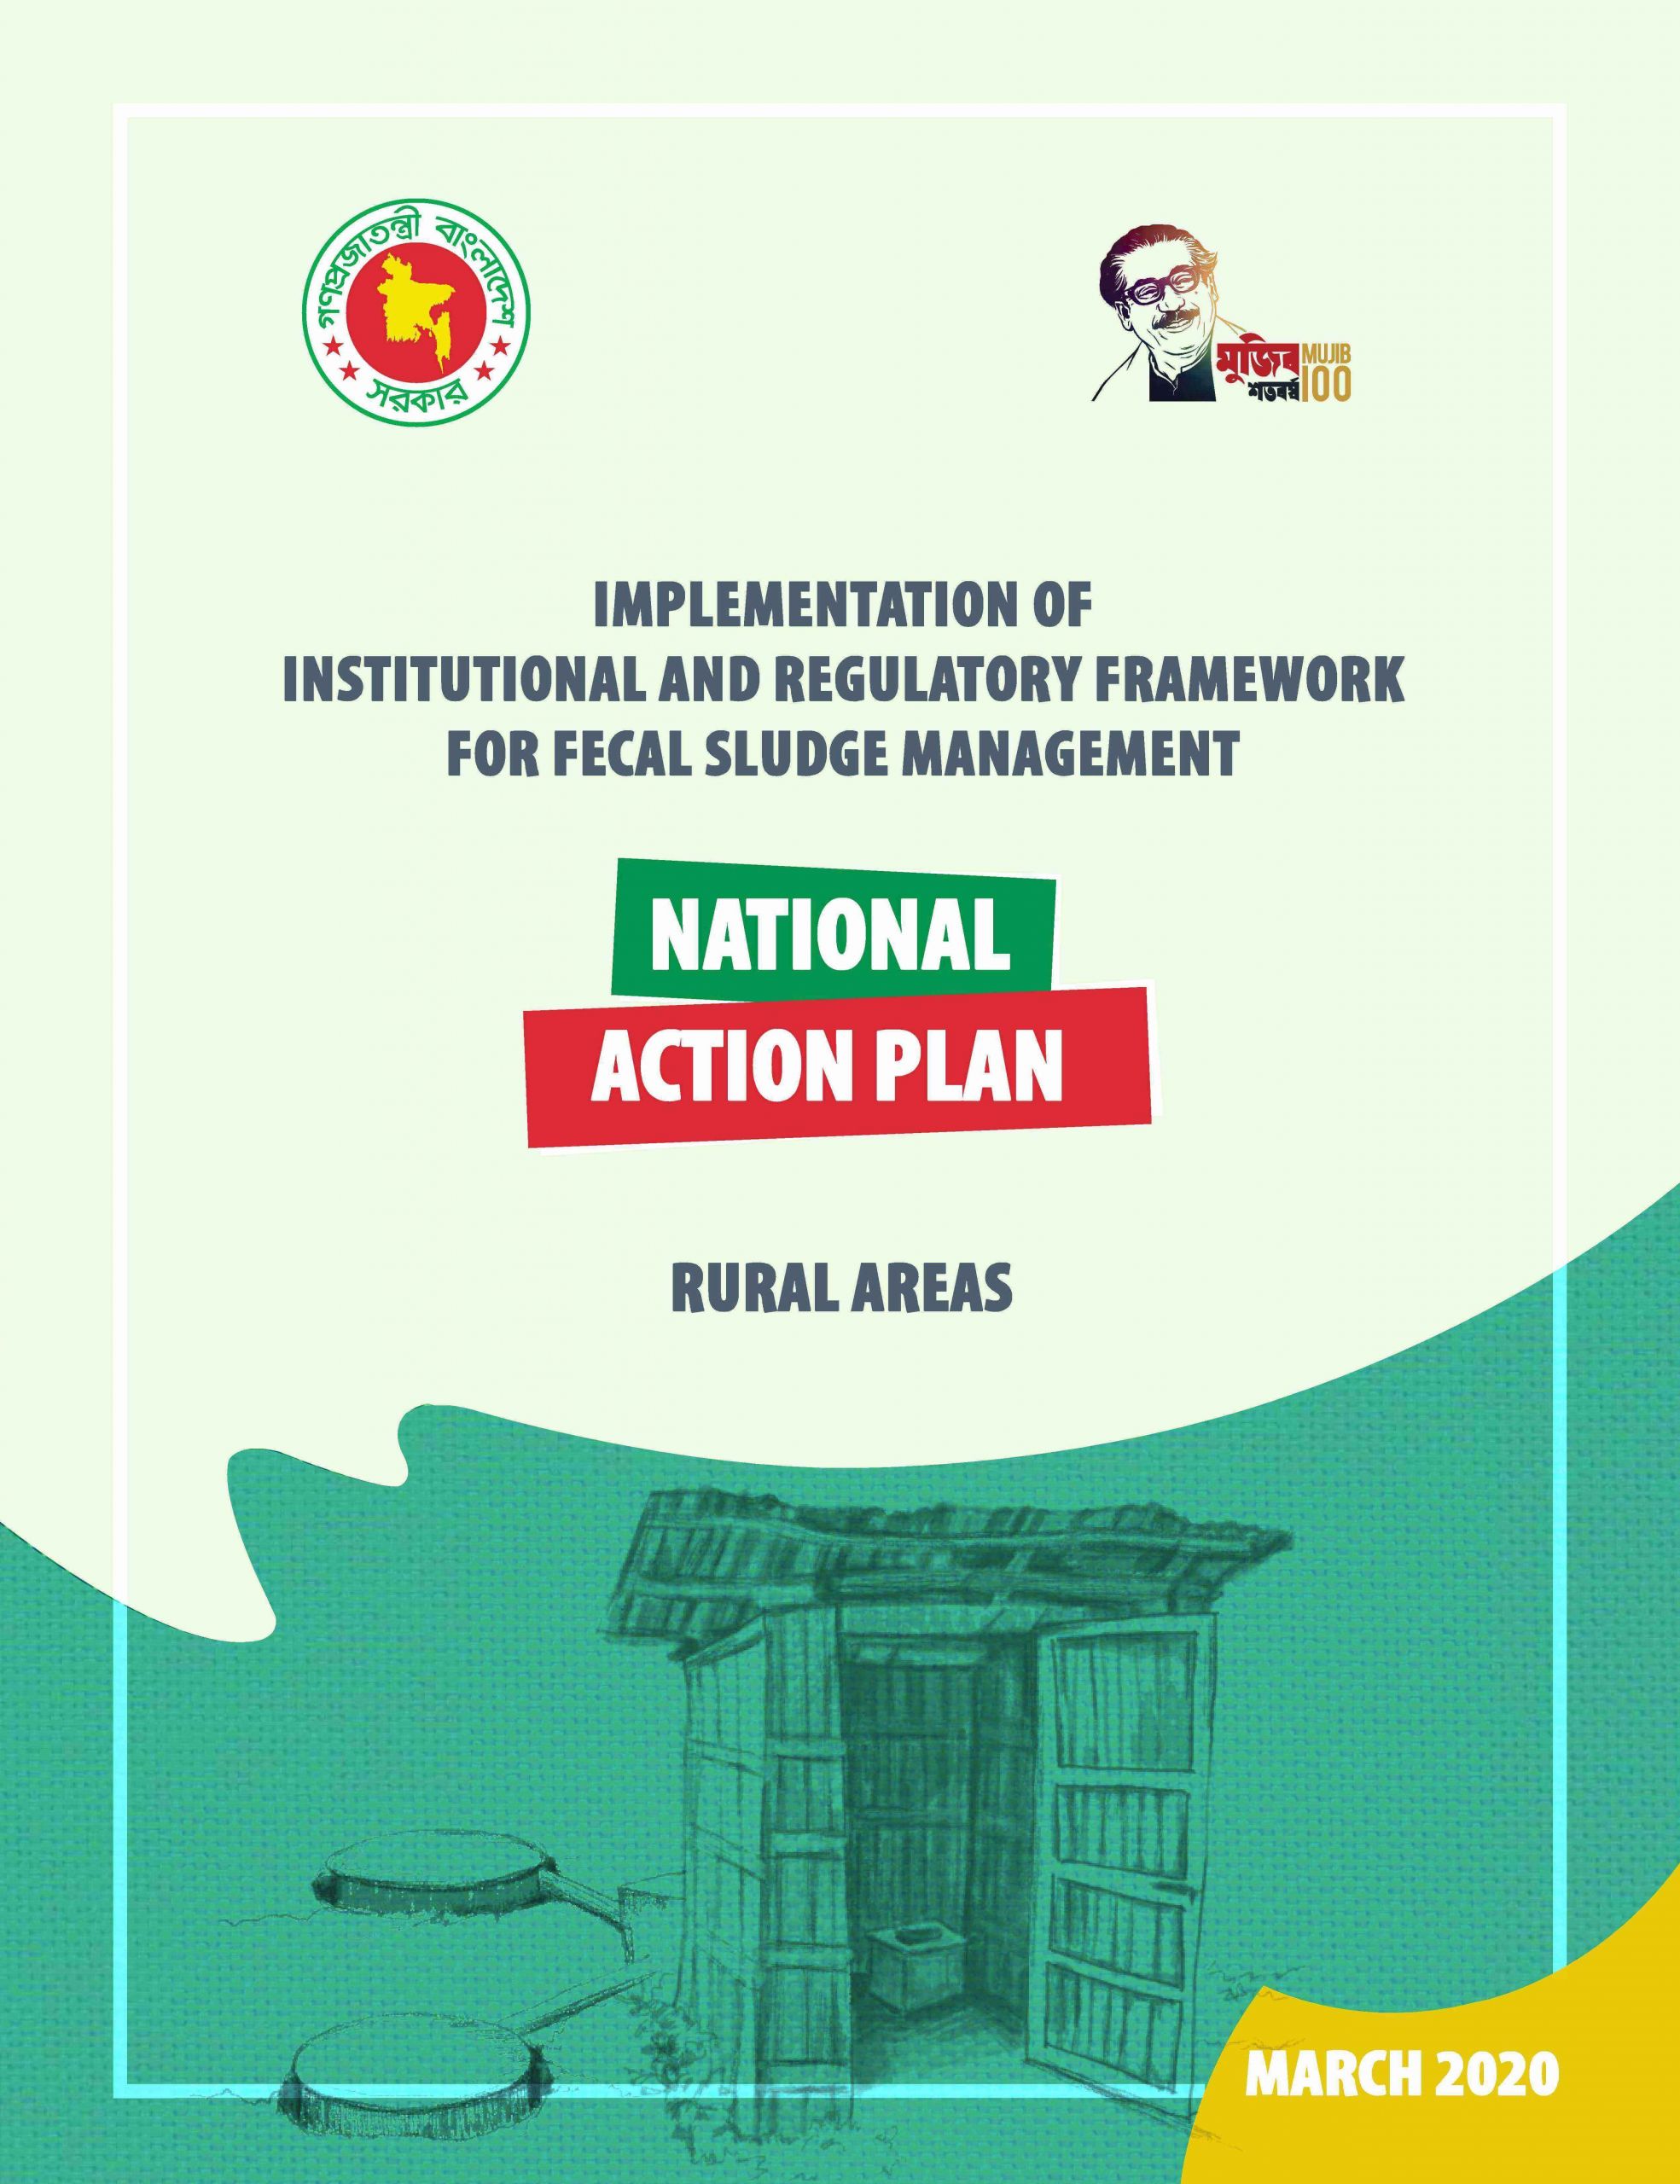 National Action Plan for Implementation of Institutional and Regulatory Framework (IRF) for Fecal Sludge Management for Rural Areas